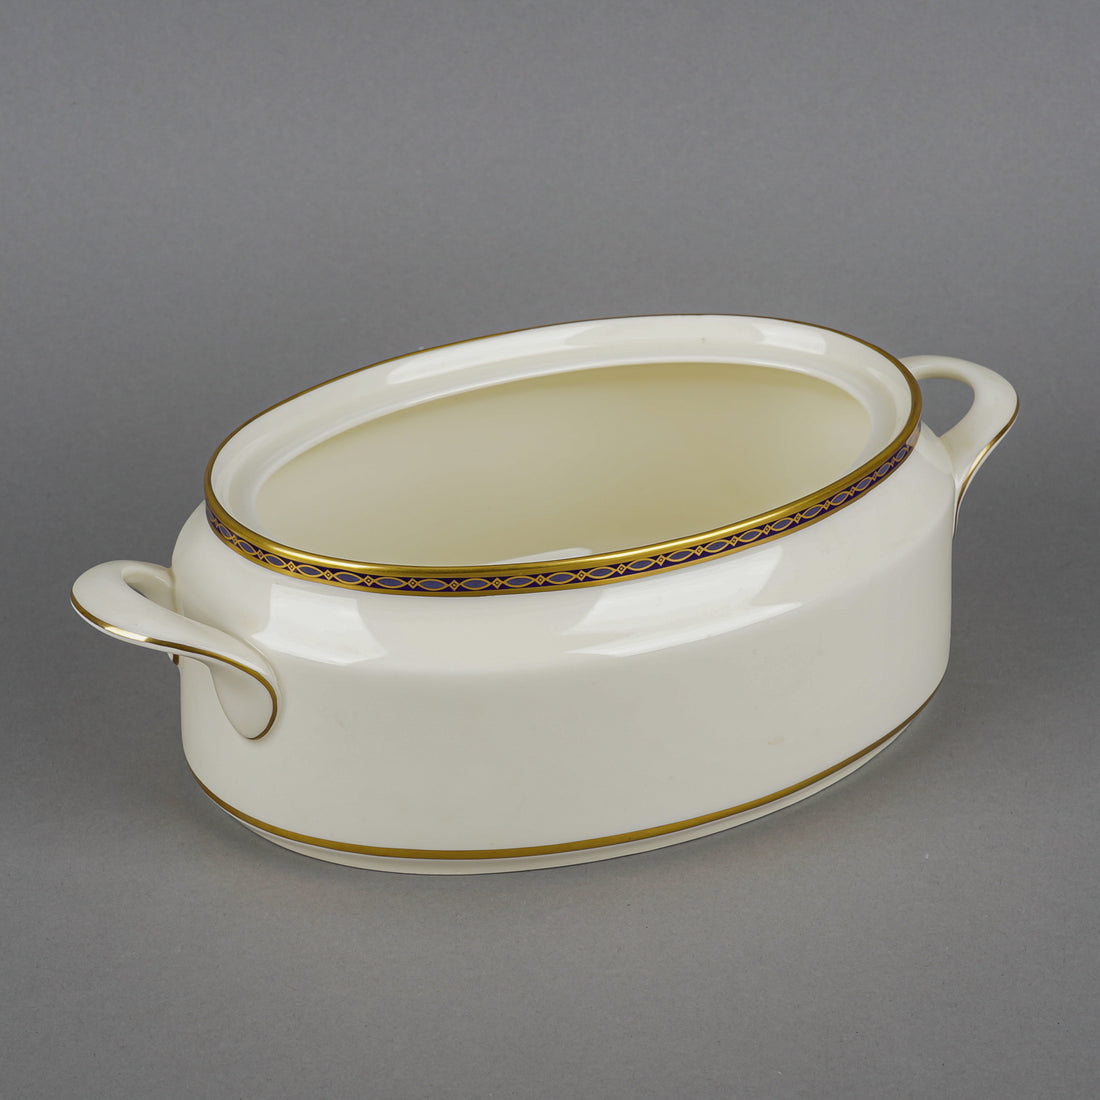 MINTON St. James Oval Covered Serving Dish